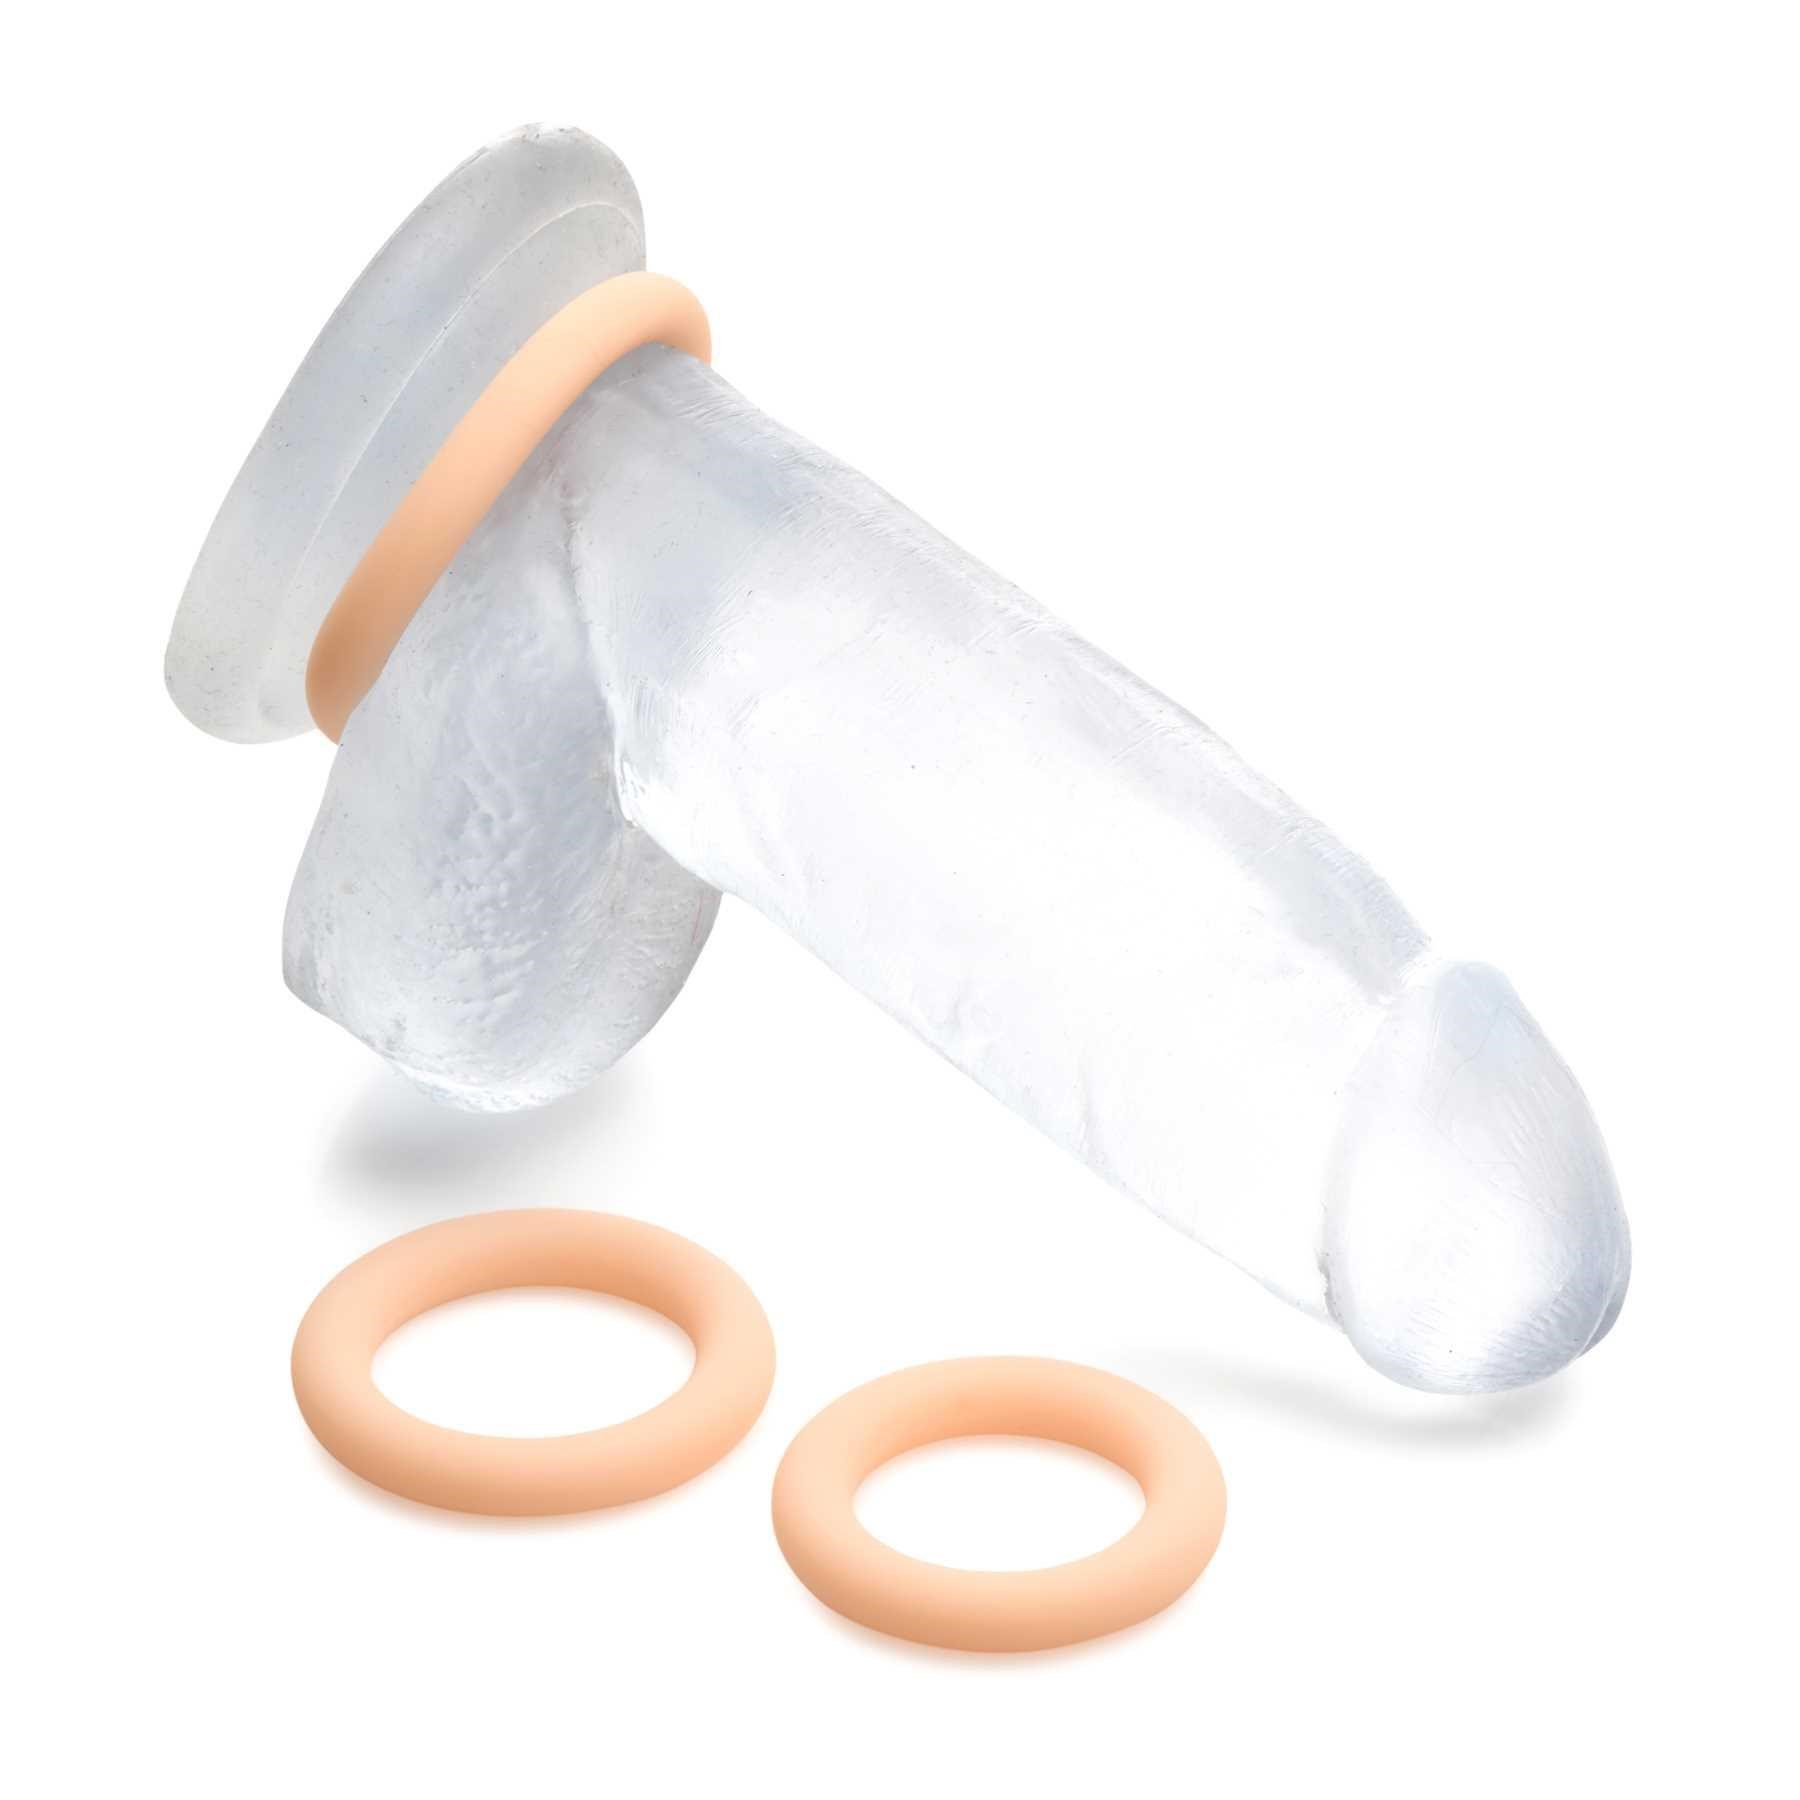 Jock Silicone Cock Ring Set white with one ring on dildo and other 2 besides